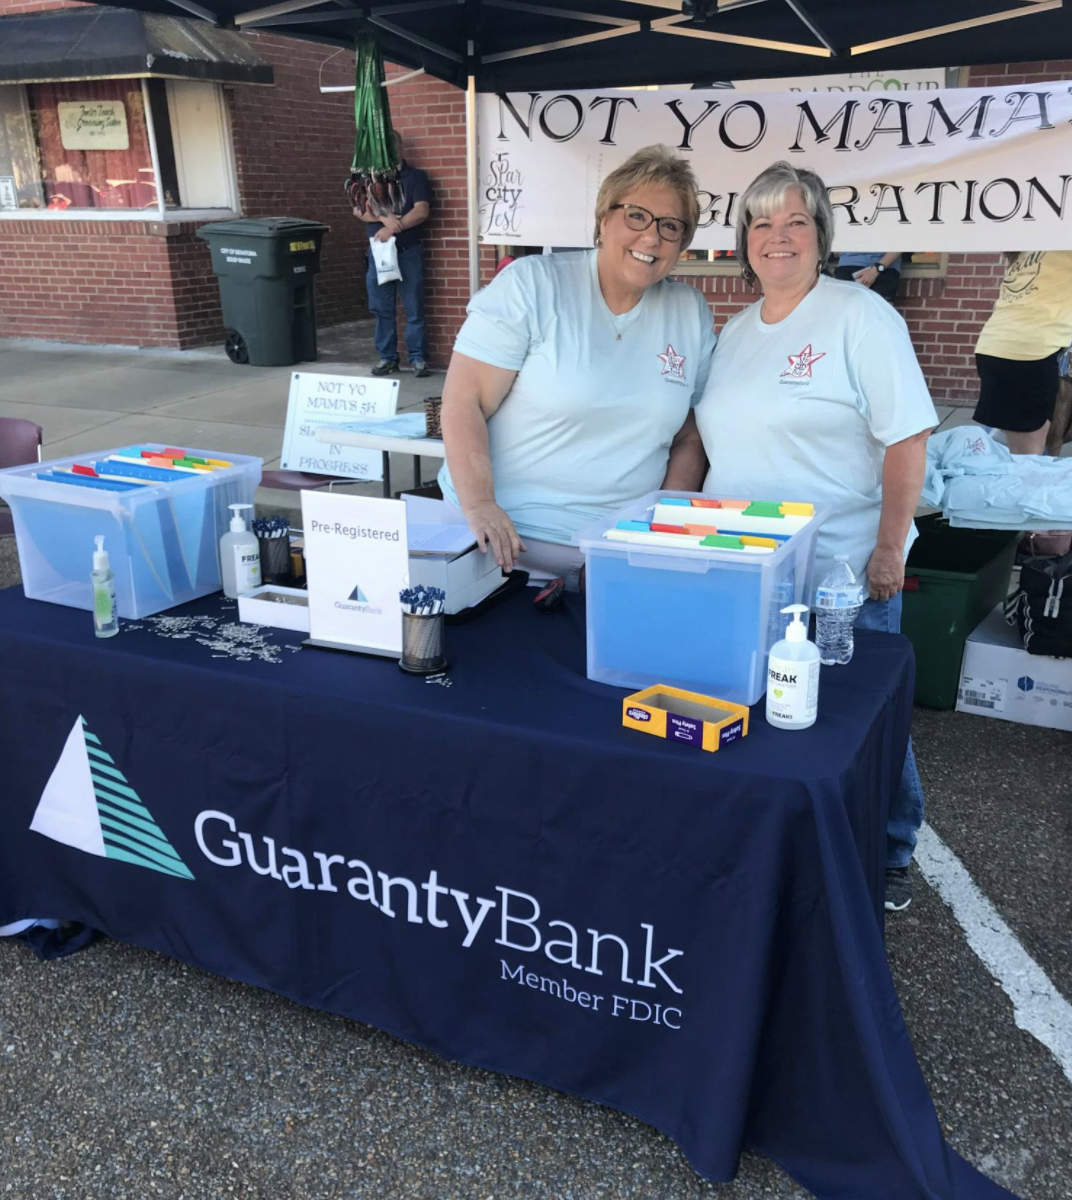 Two women behind a table and underneath a tent at a volunteering event. The two women are smiling as they stand behind the table with a blue table cover with the Guaranty Bank logo and a banner behind them. The table is set with bins, pens, and hand sanitizer.